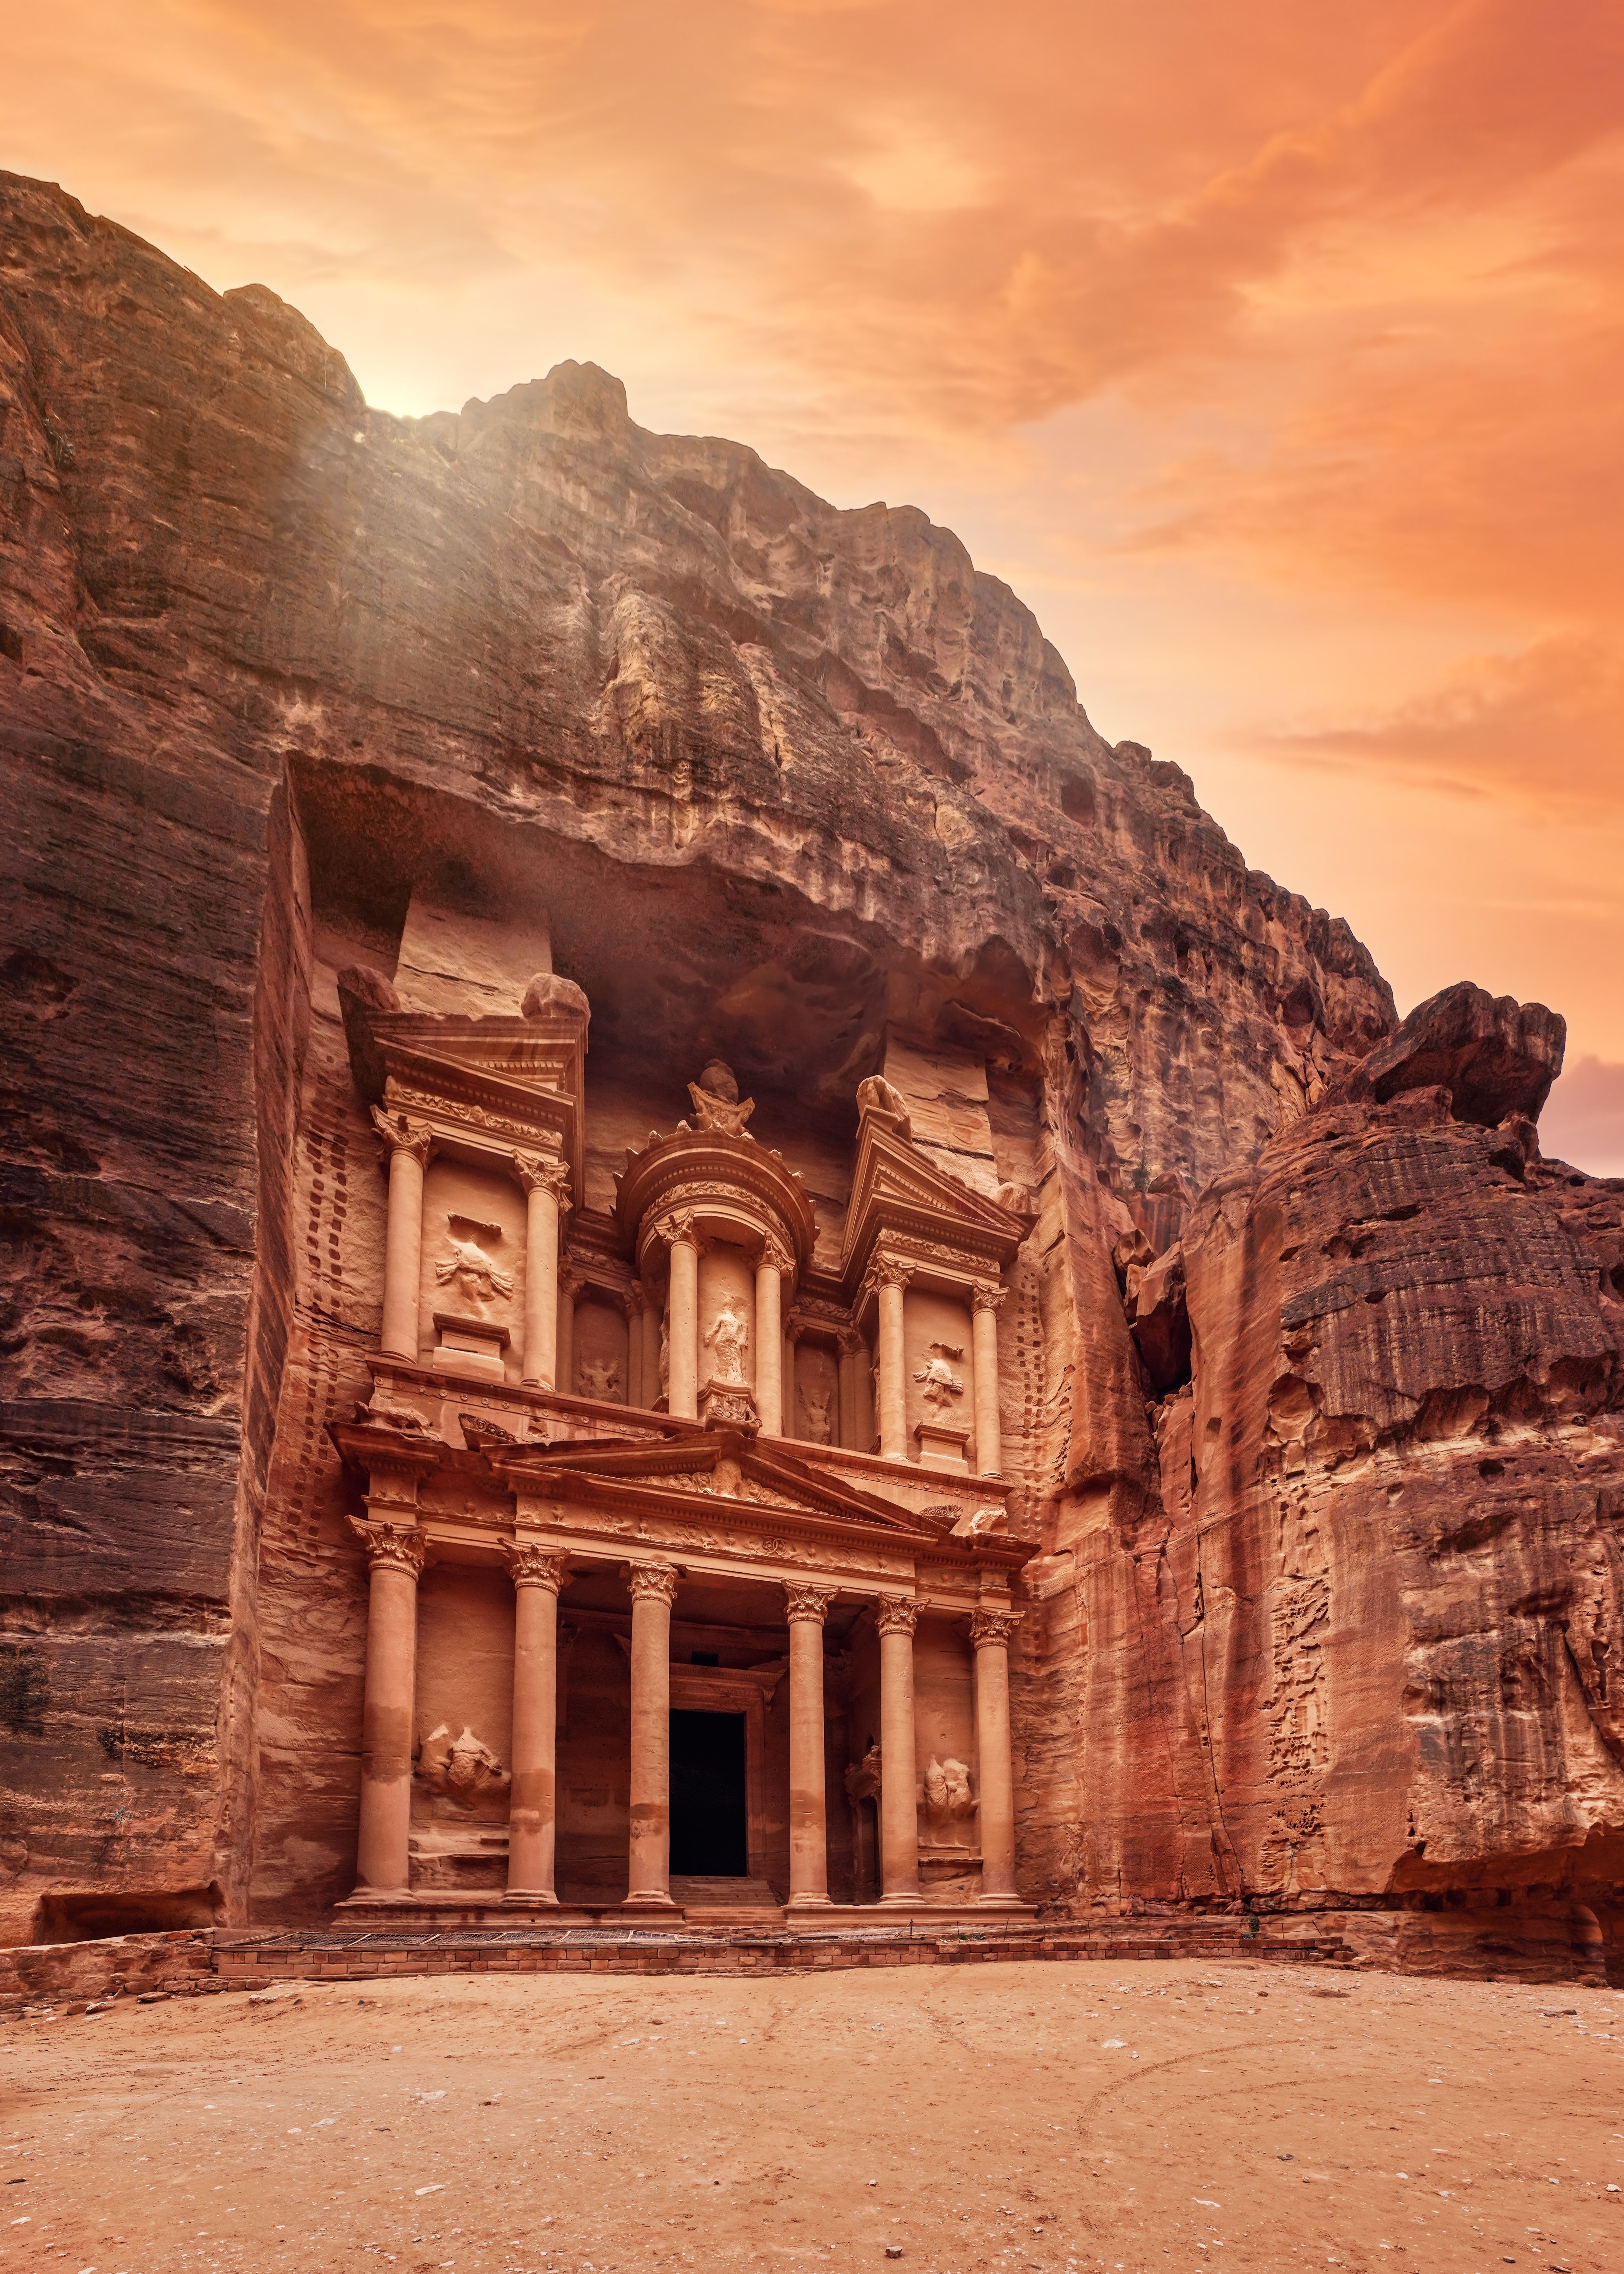 Petra is one of the Modern 7 Wonders Of The World. What would you say gives the city this status?